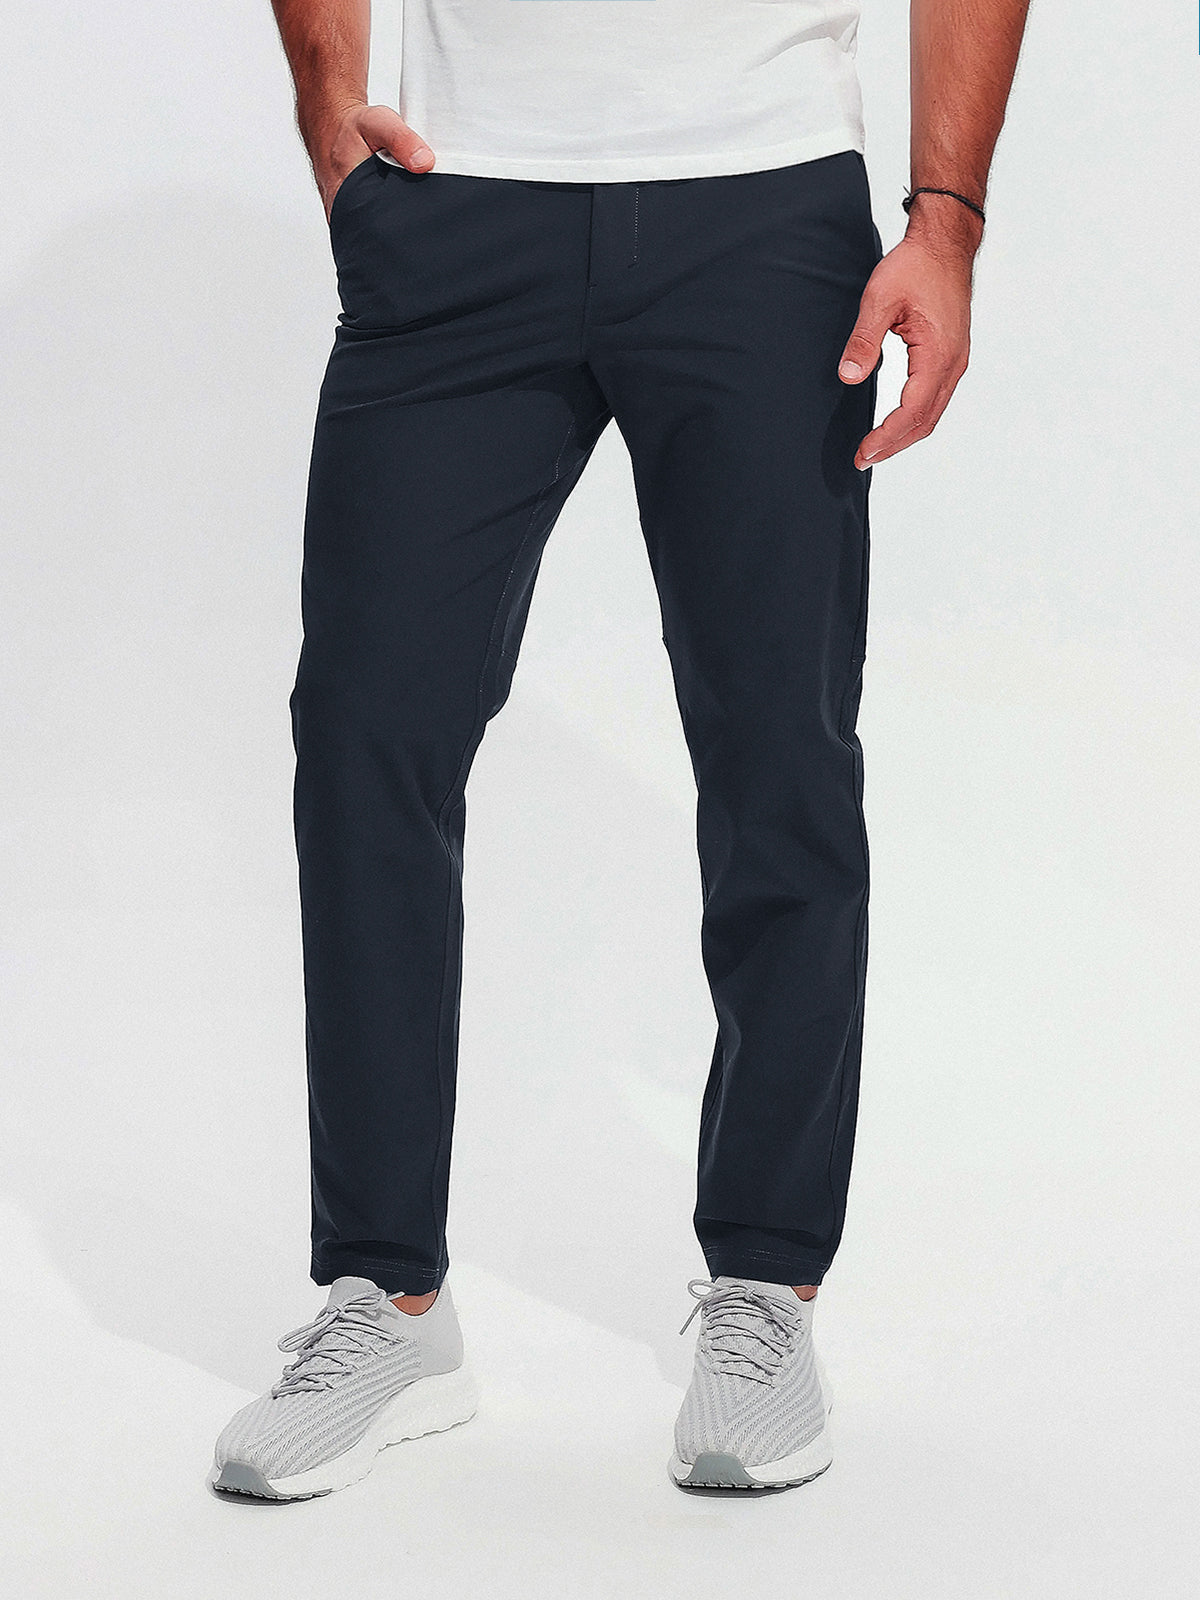 M's Commission Everyday Performance Chino Pants Black-Zittor